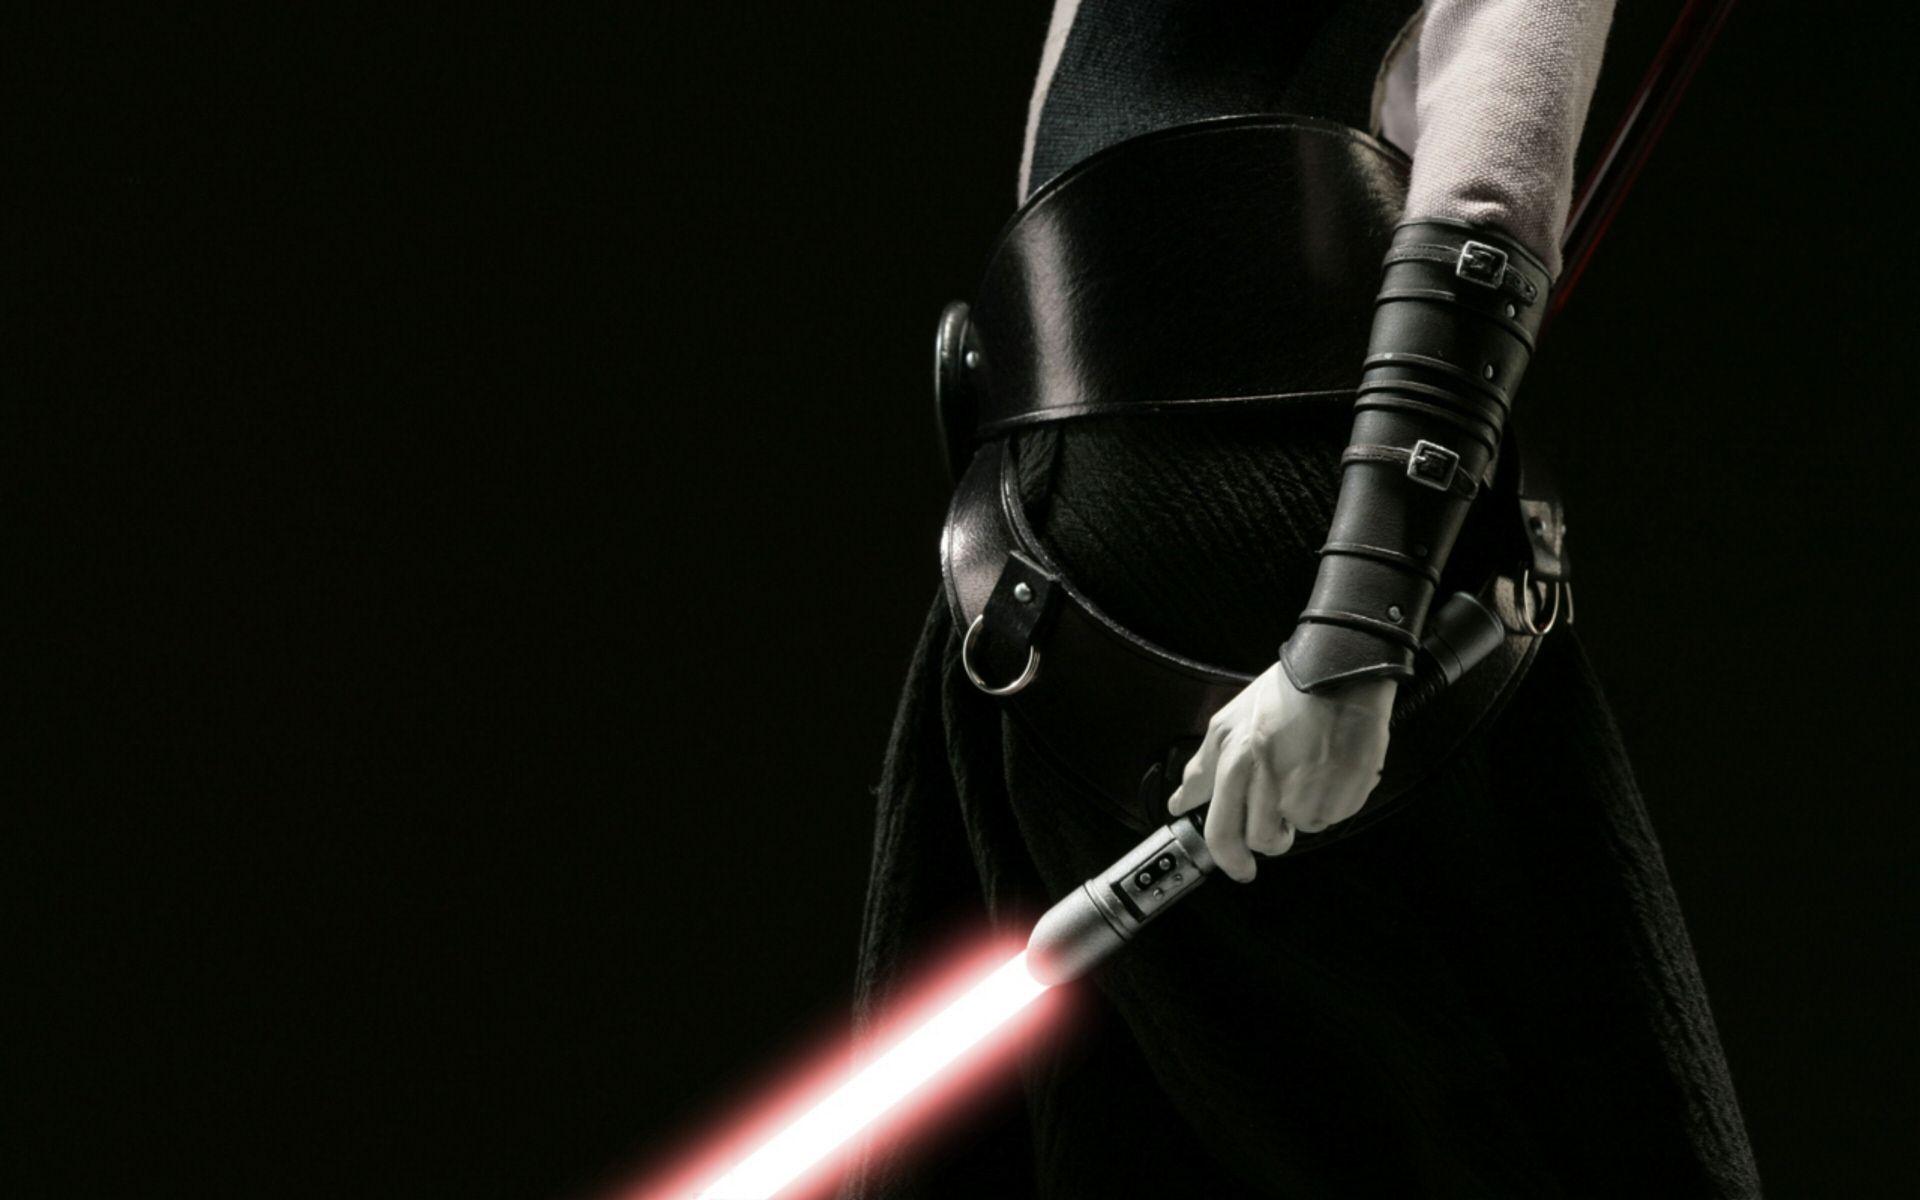 Download the Sith Lord Wallpaper, Sith Lord iPhone Wallpaper, Sith